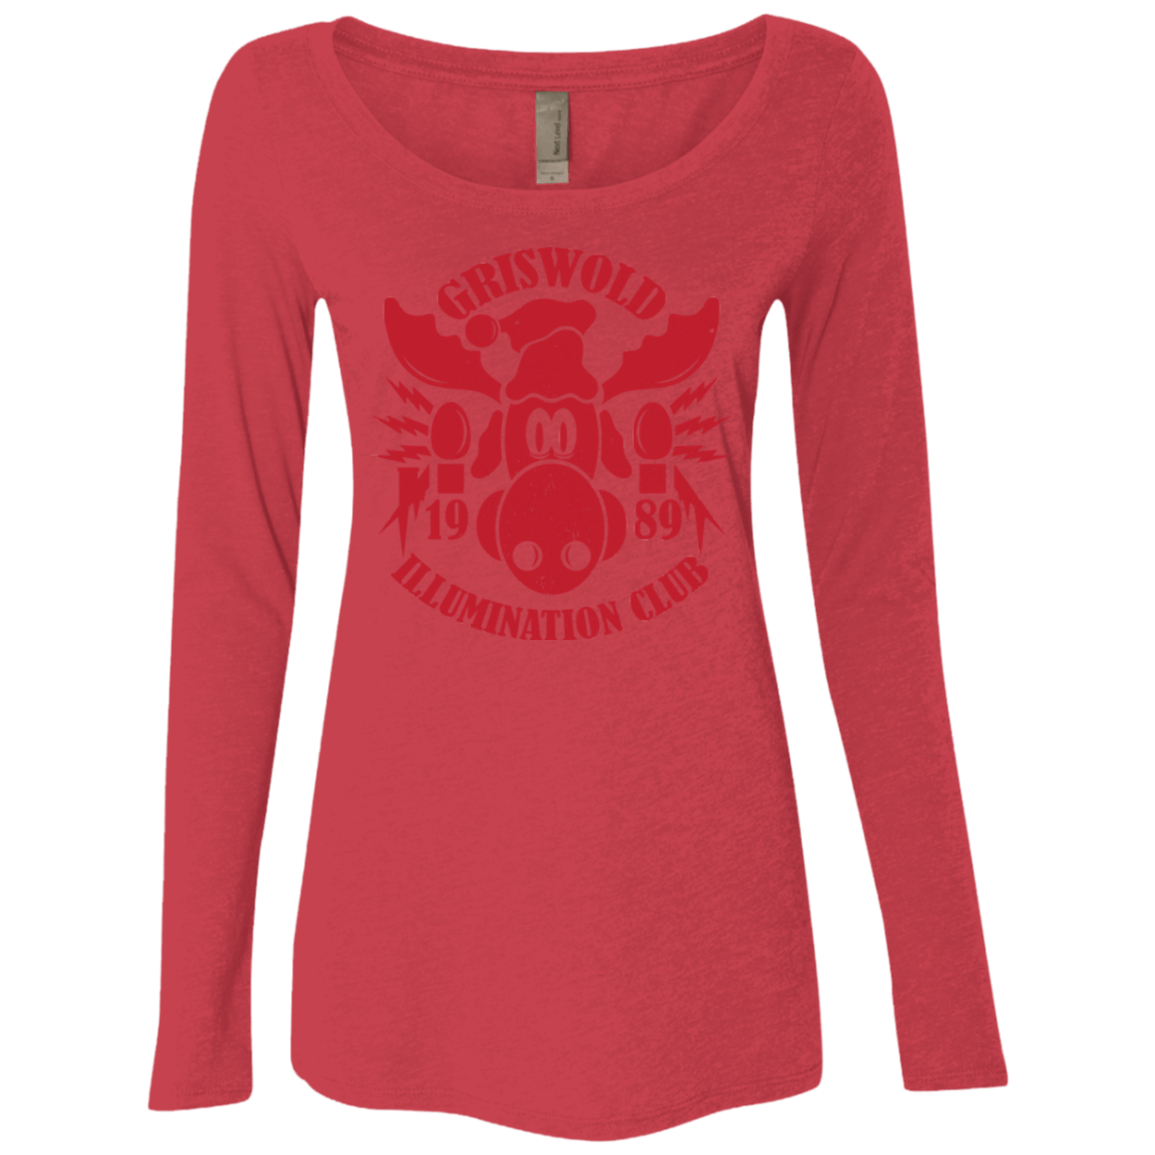 T-Shirts Vintage Red / Small Griswold Illumination Club Women's Triblend Long Sleeve Shirt